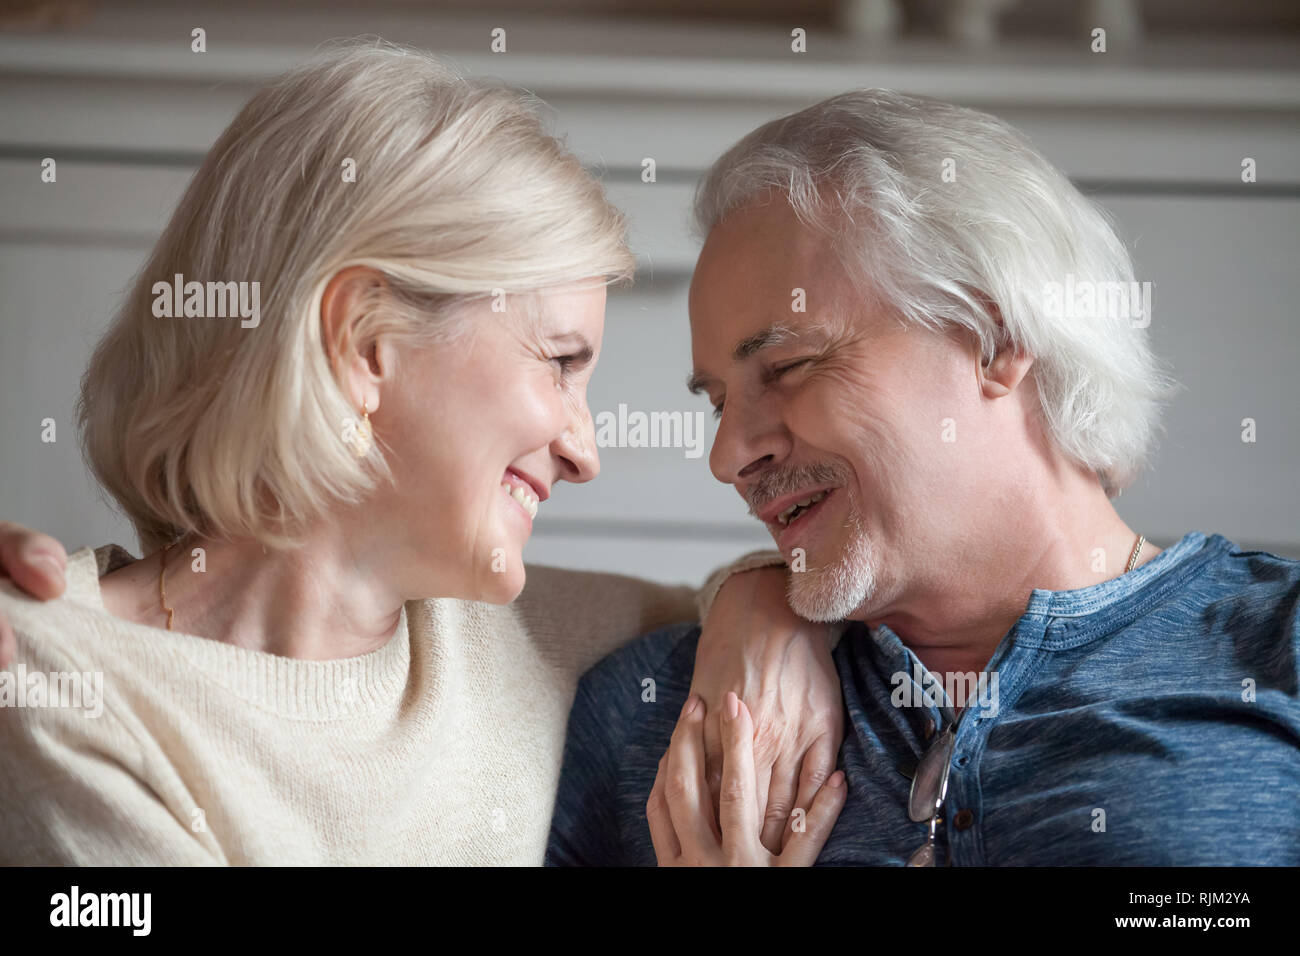 Closeup portrait of aged spouses smiling looking at each other Stock Photo